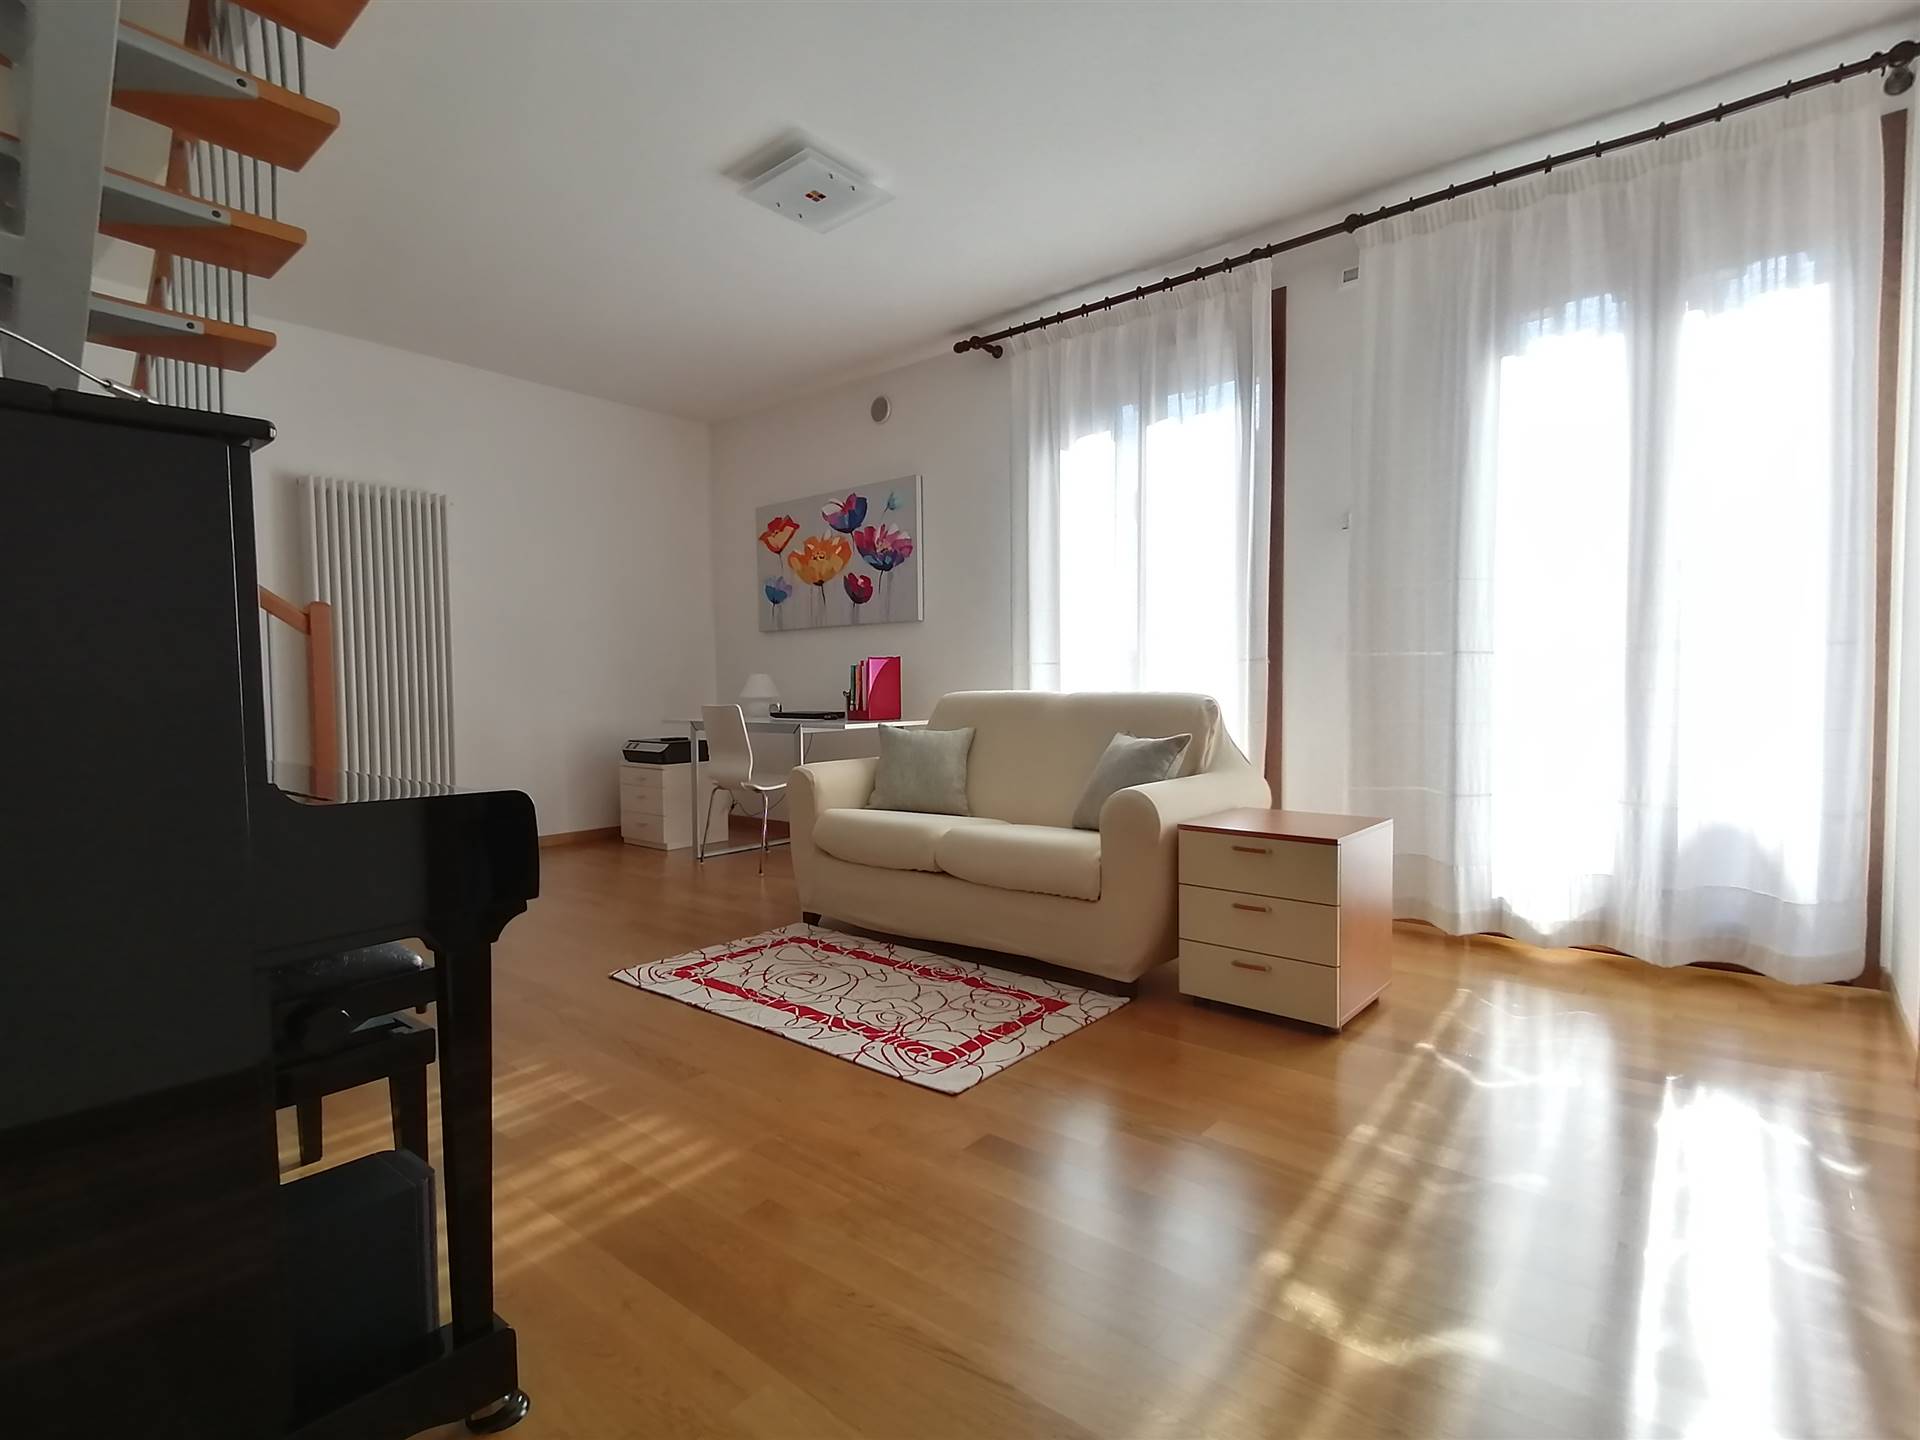 OLMO, MARTELLAGO, Apartment for sale, Almost new, Heating Individual heating system, Energetic class: F, placed at 2° on 3, composed by: 3 Rooms, 